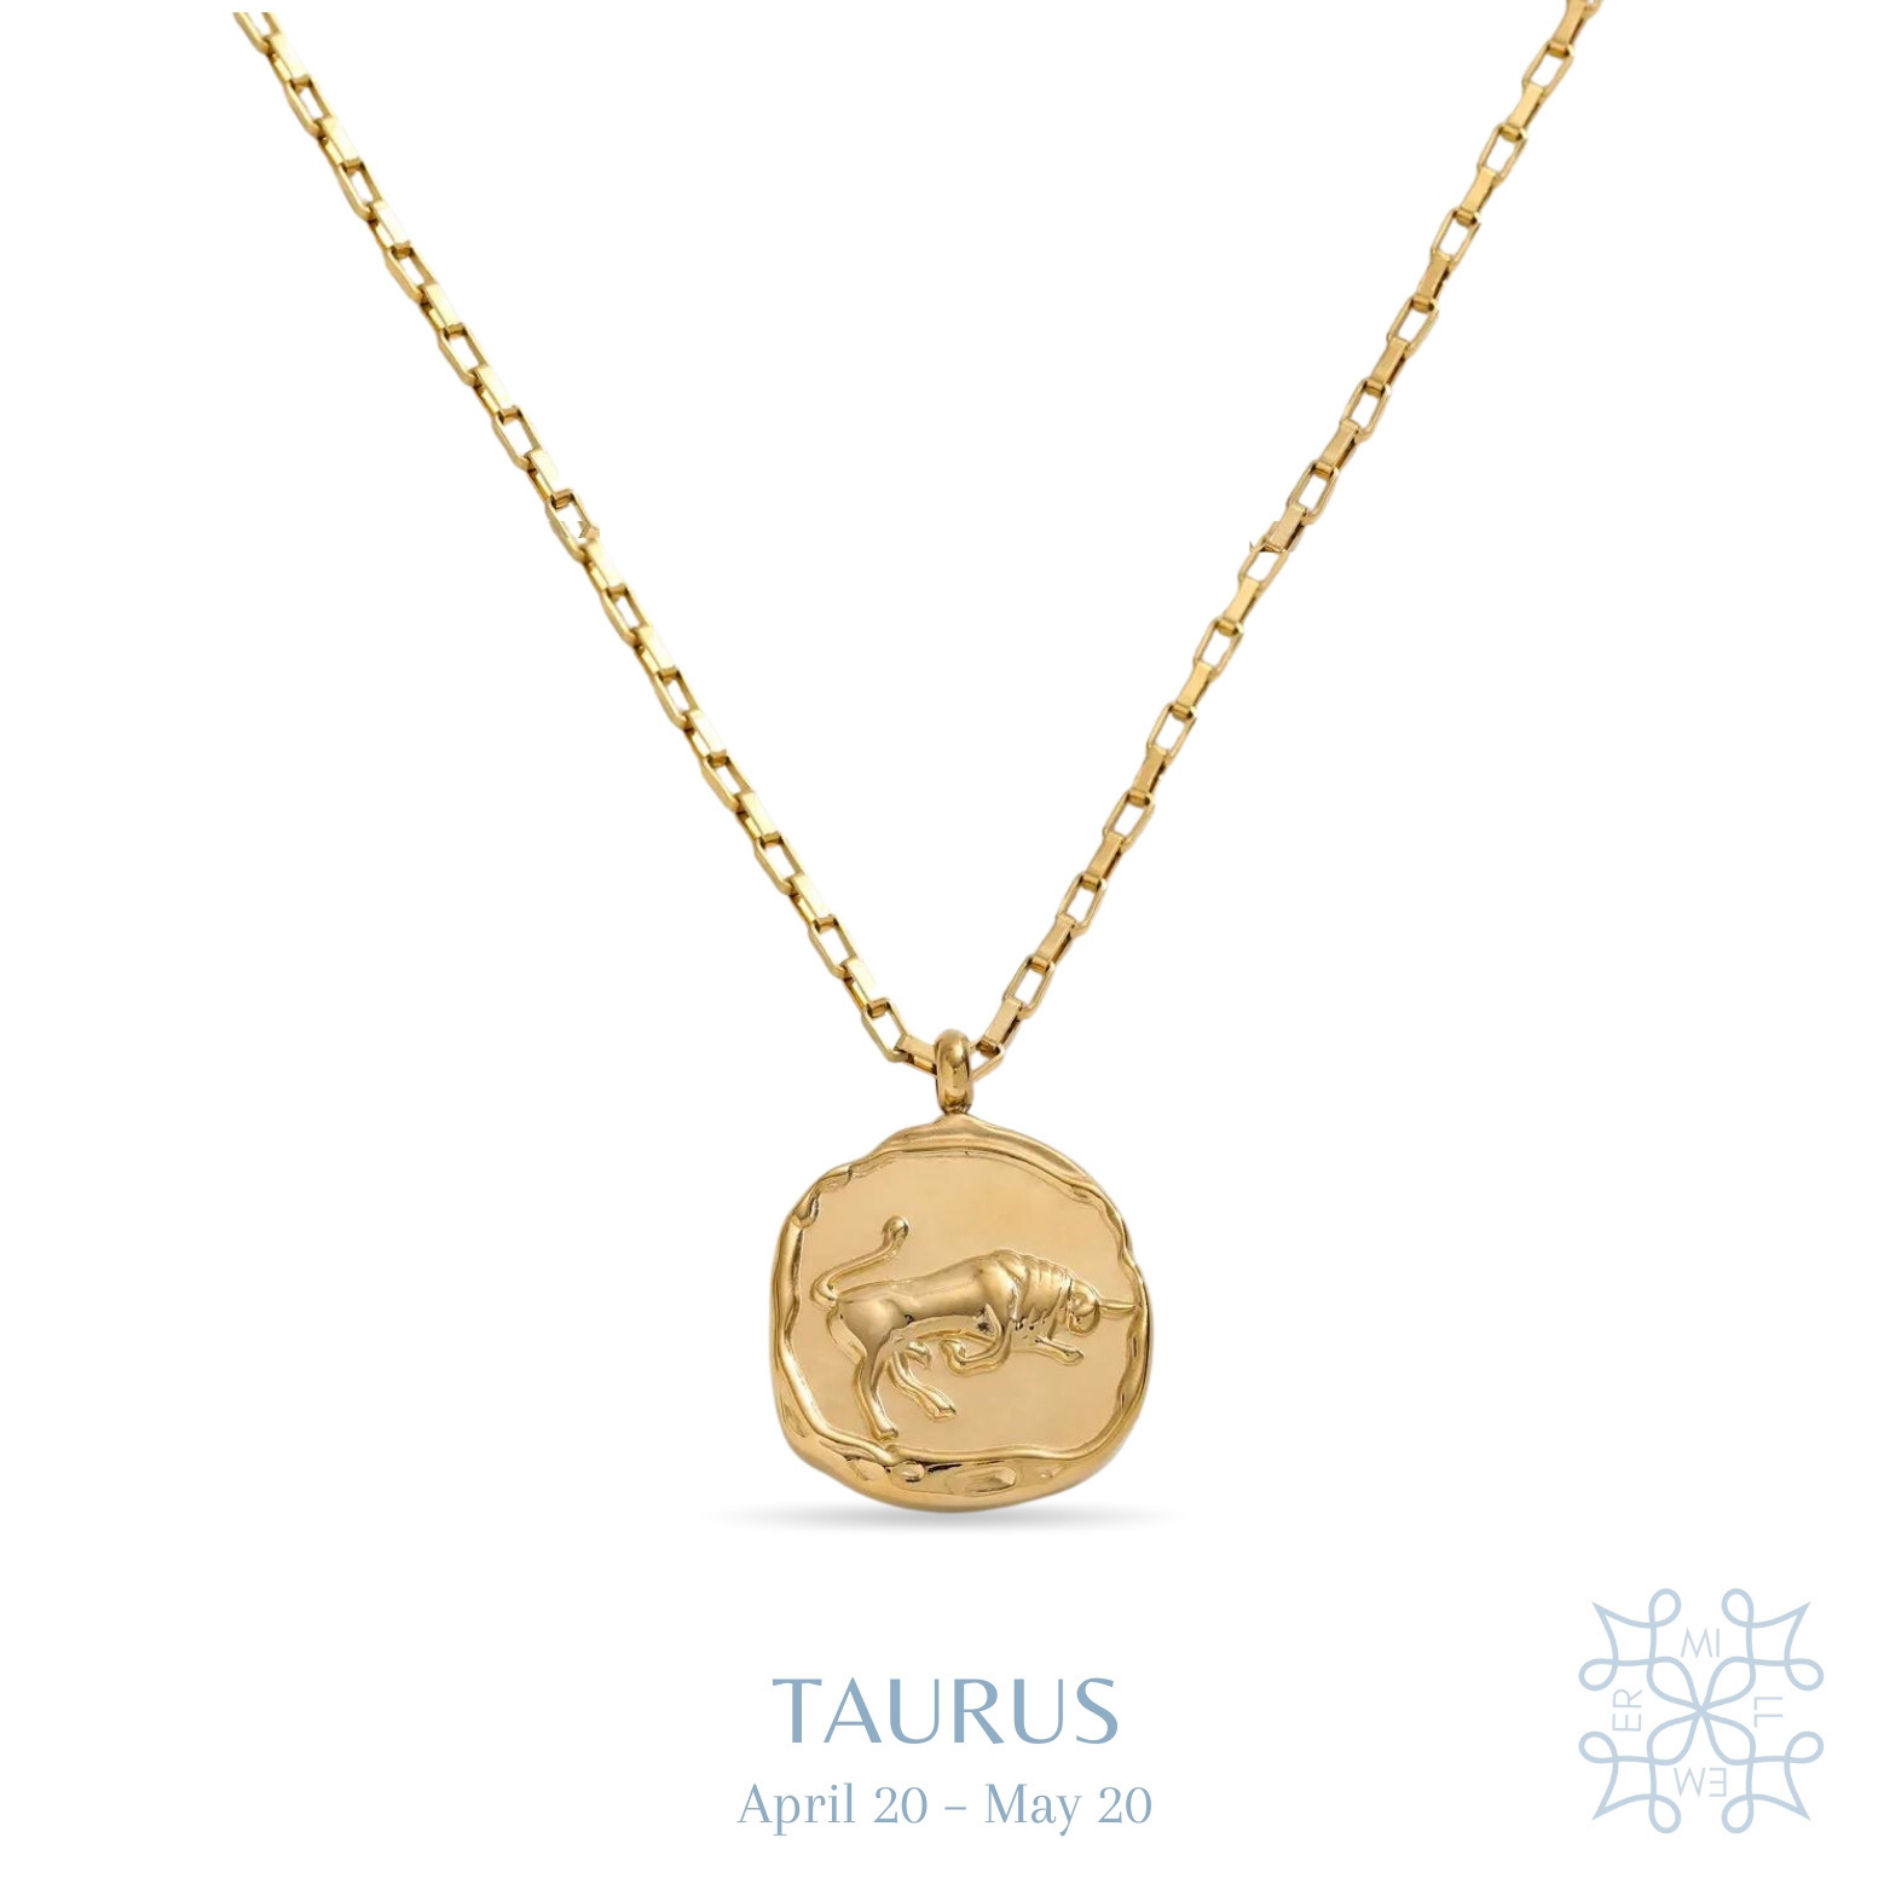 Irregular shape round medallion with Taurus symbol in the middle. Gold plated chain and medallion necklace. Taurus medallion gold necklace.